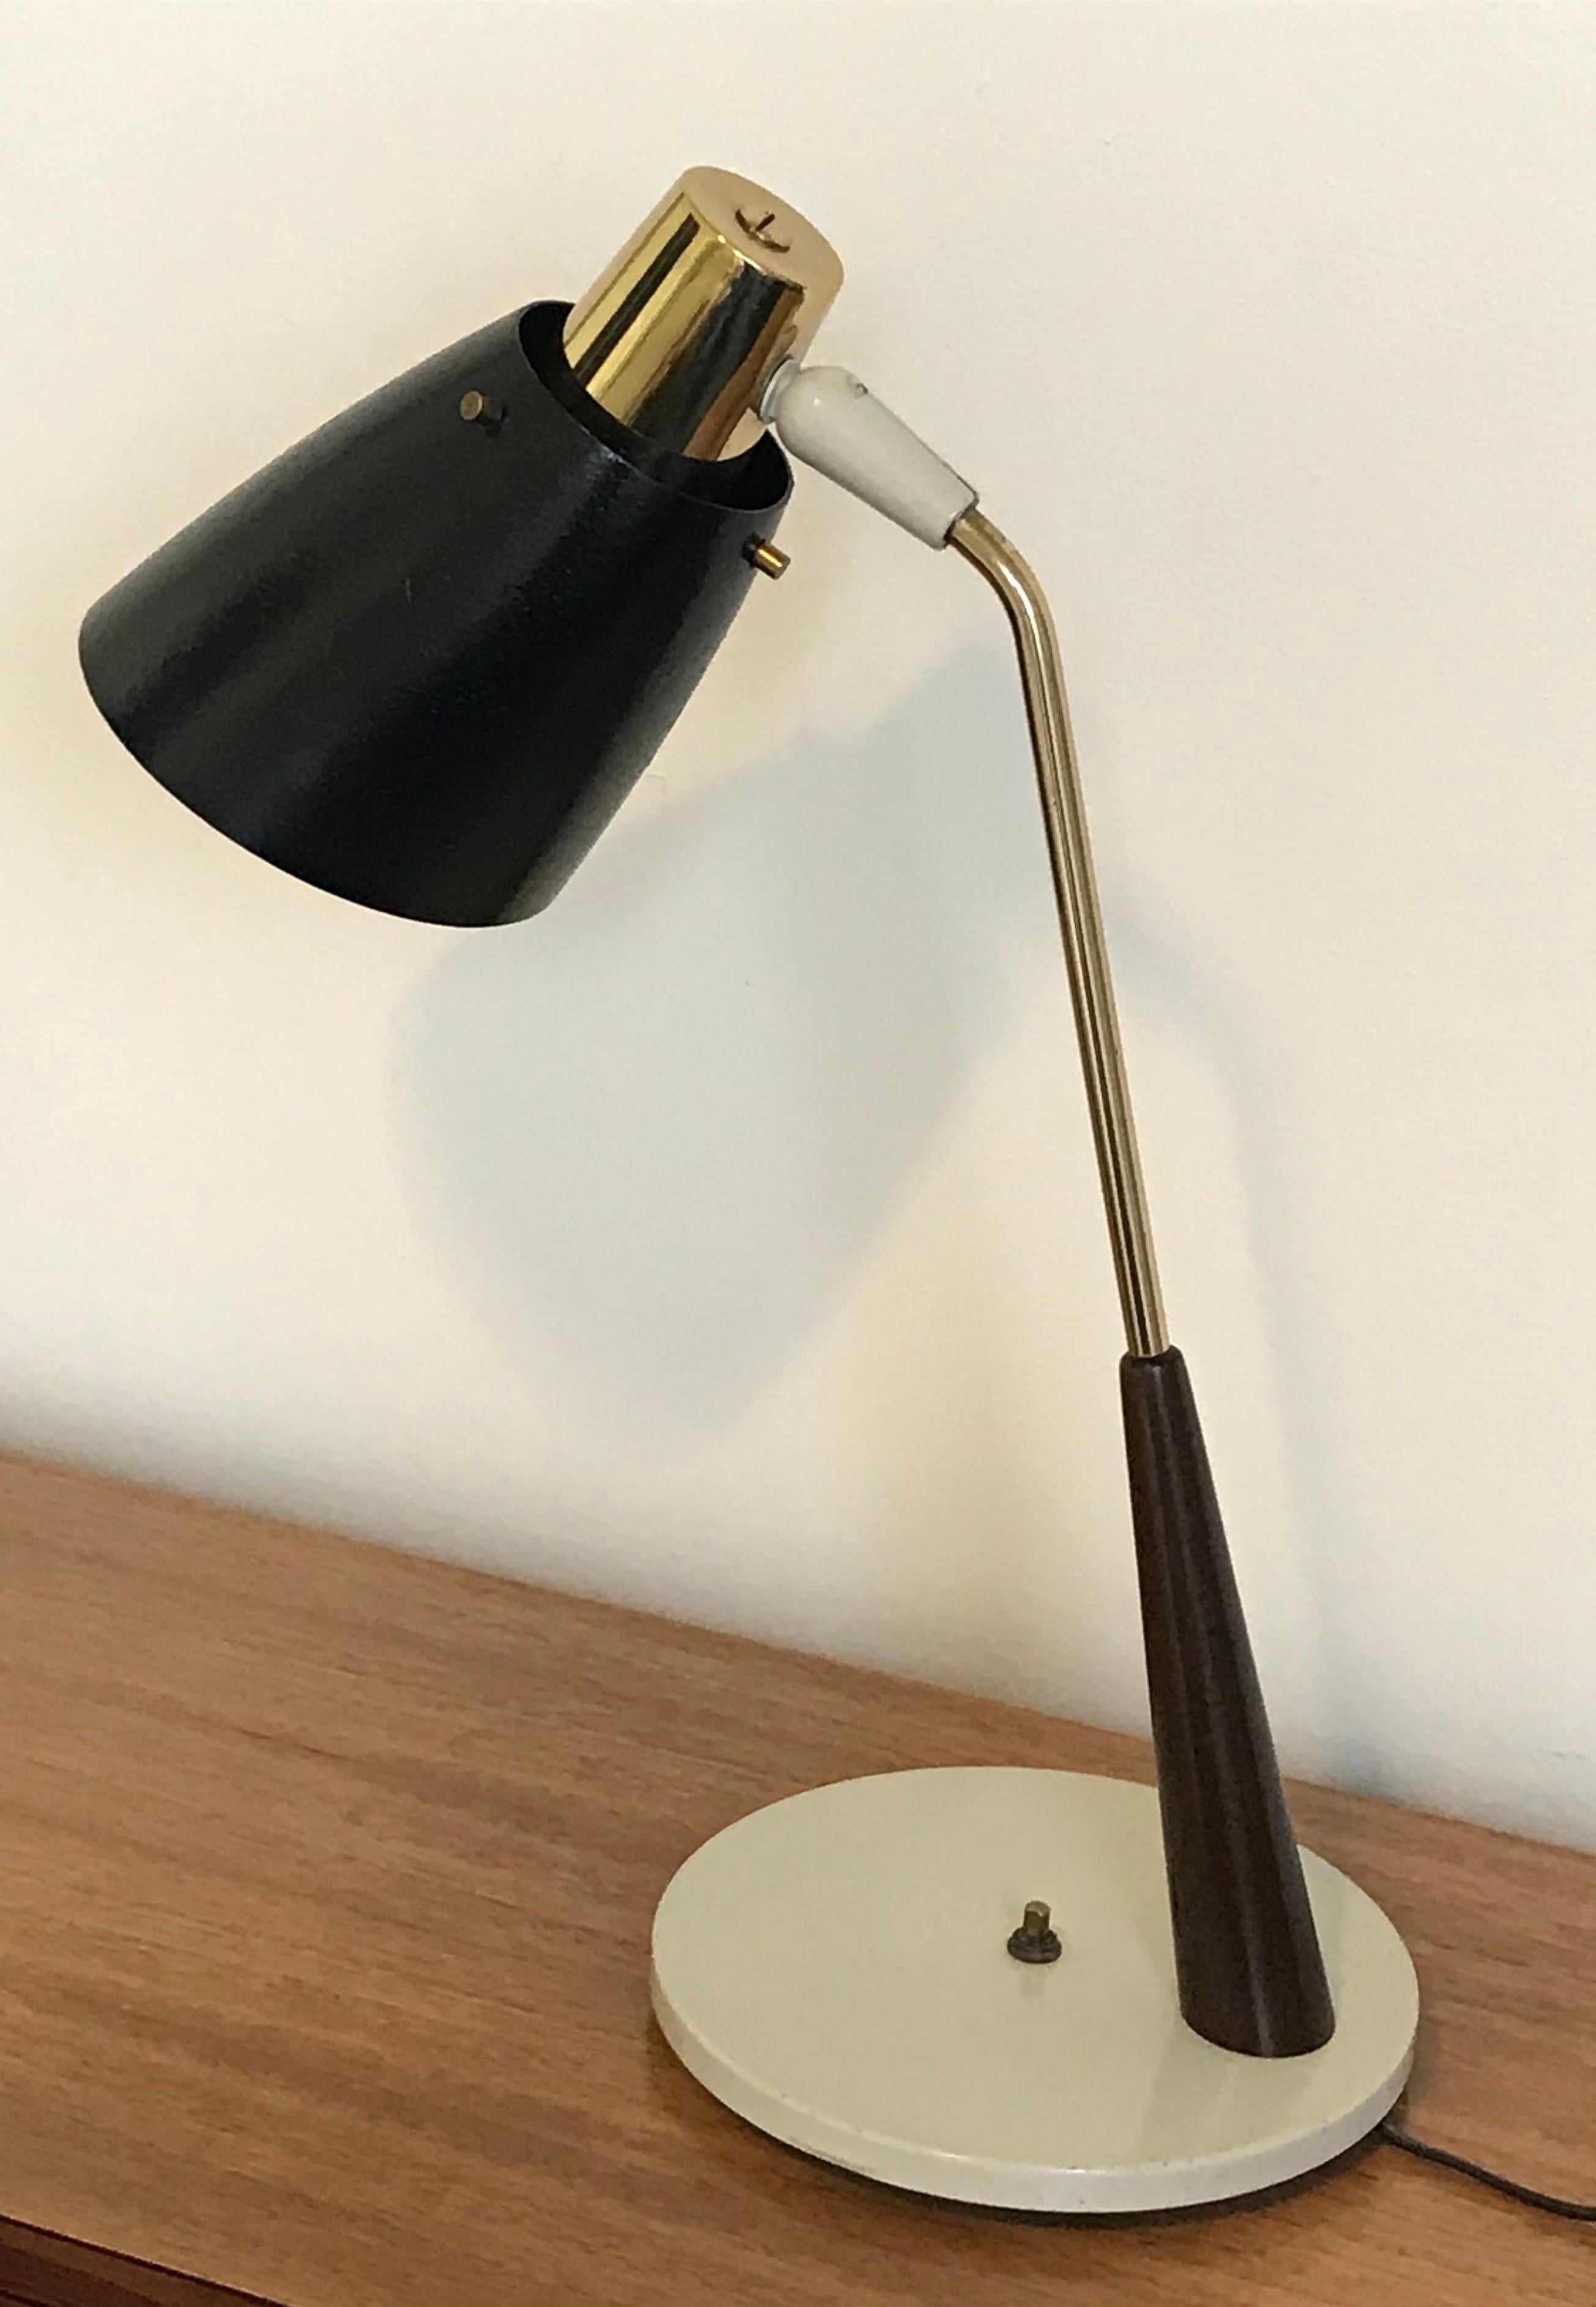 Very chic midcentury articulating desk lamp by Gerald Thurston for Lightolier. Professionally restored and rewired.